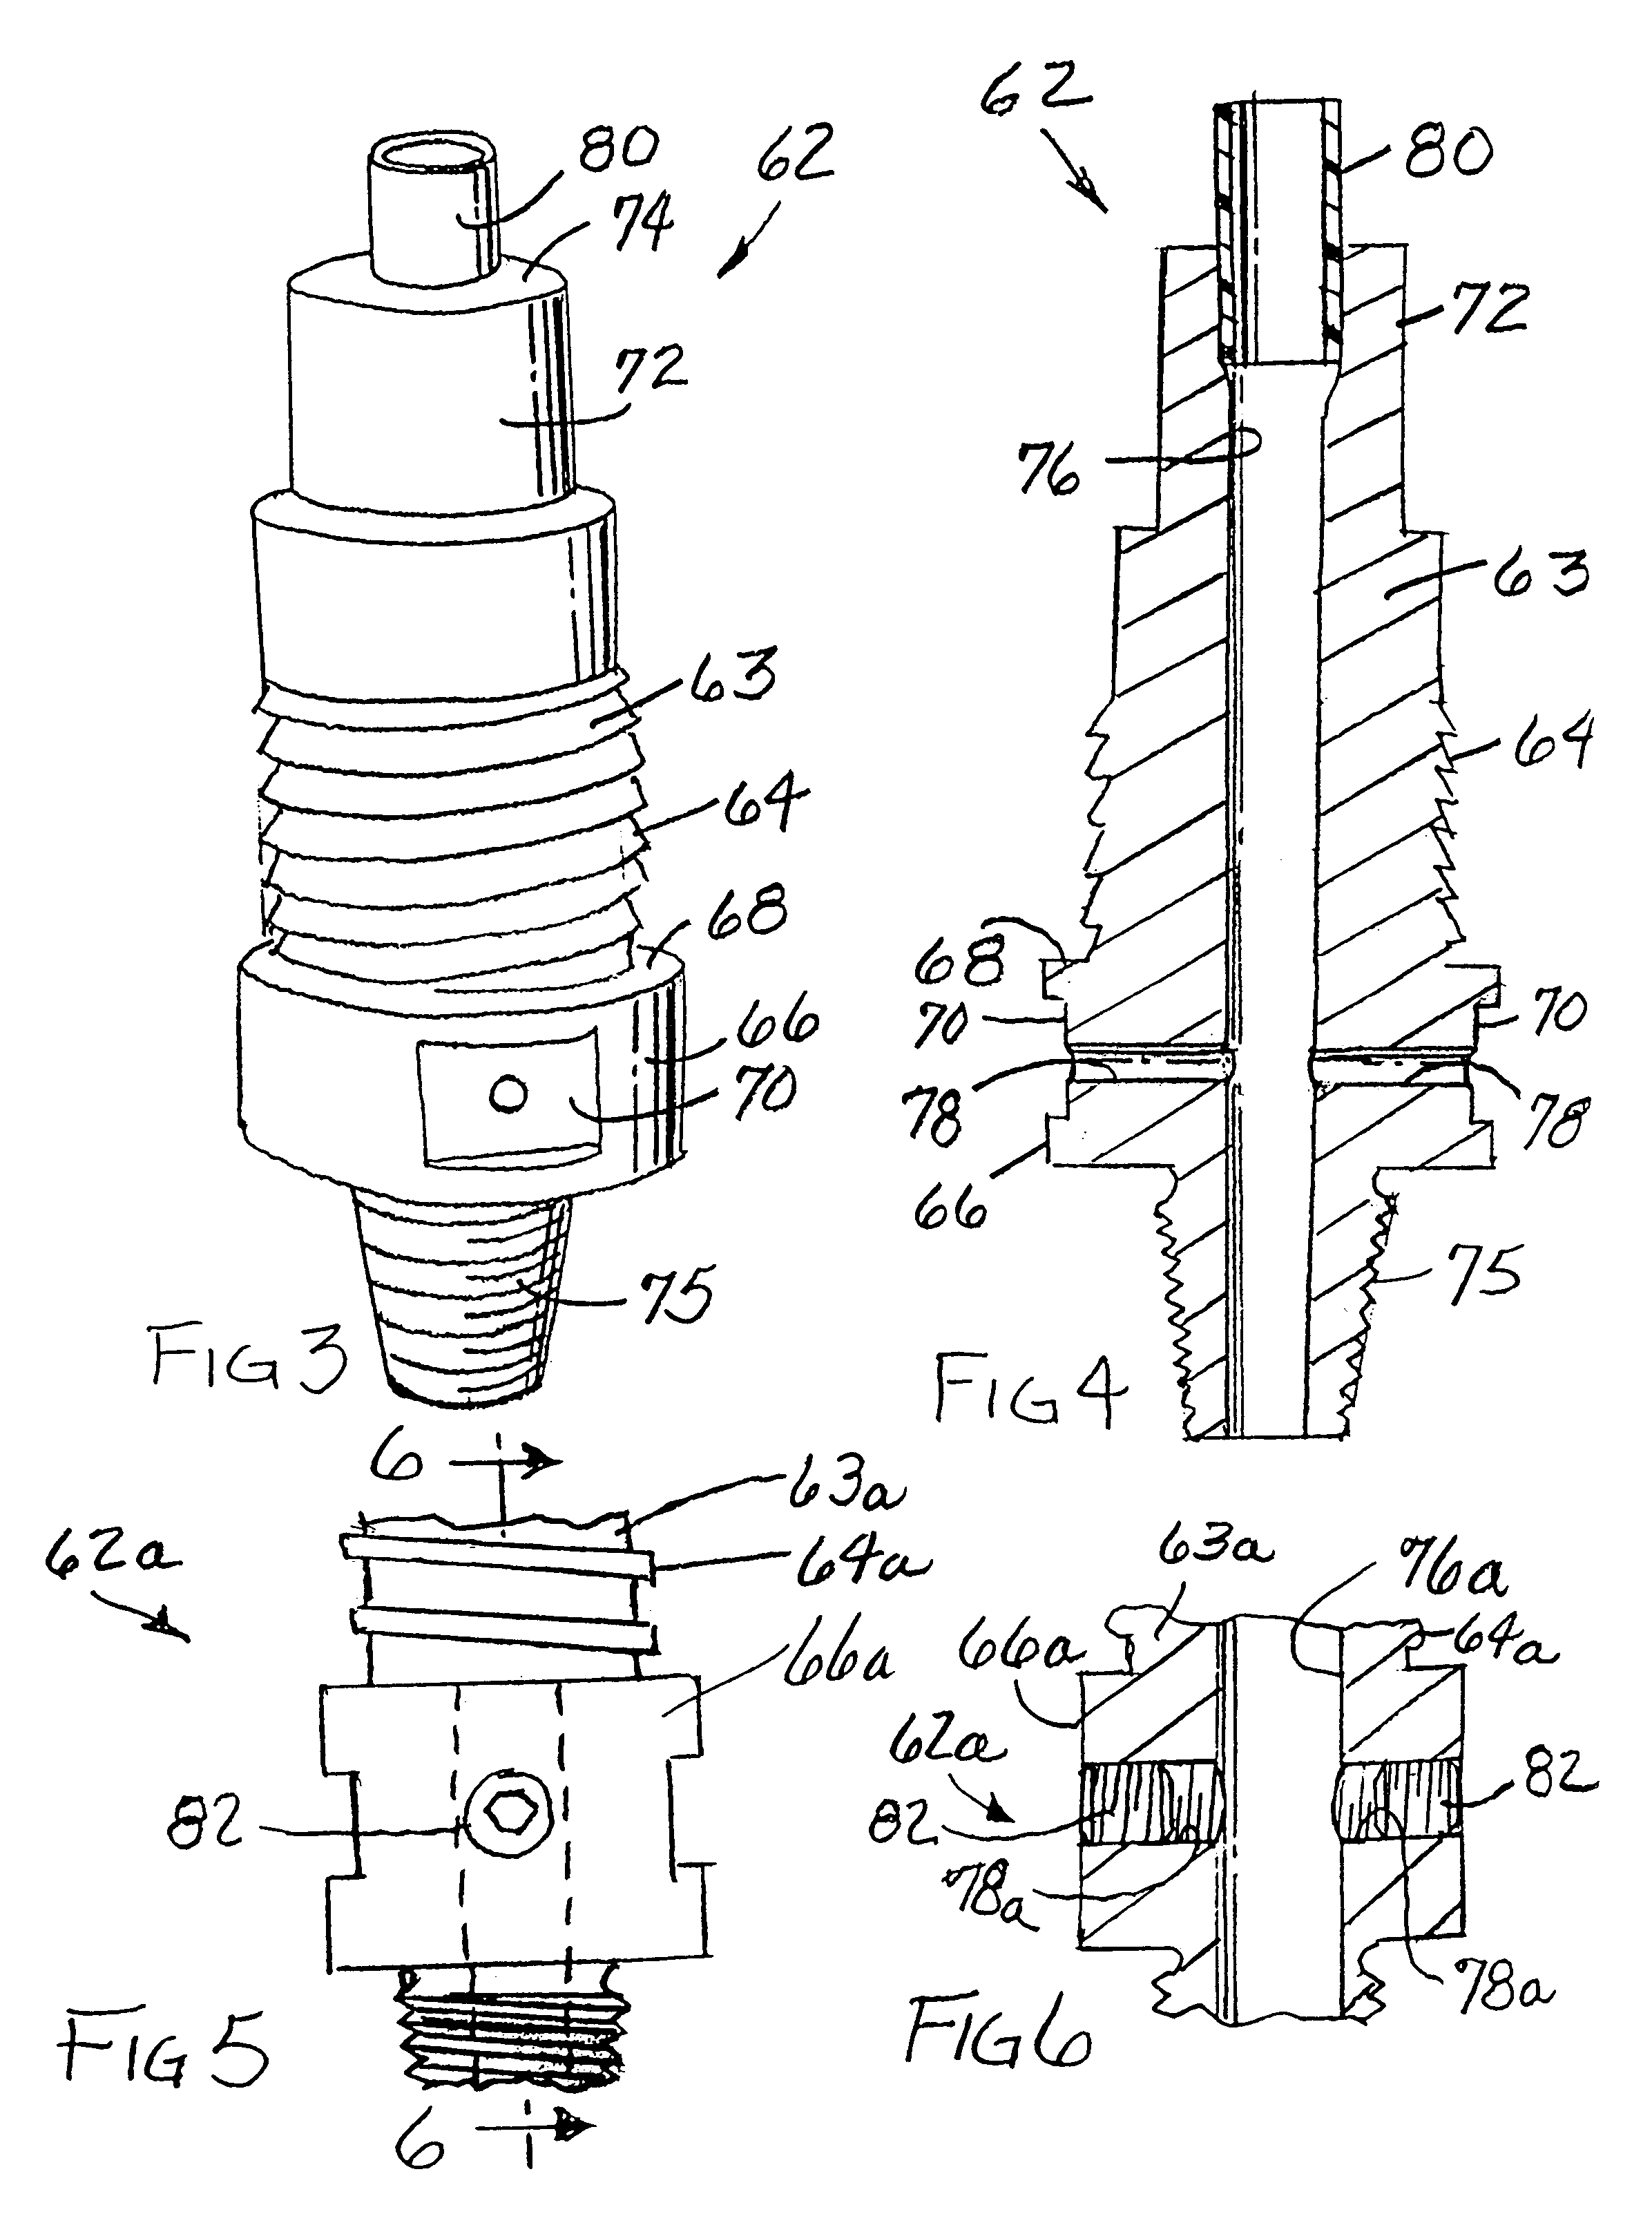 Well casing installation and removal apparatus and method